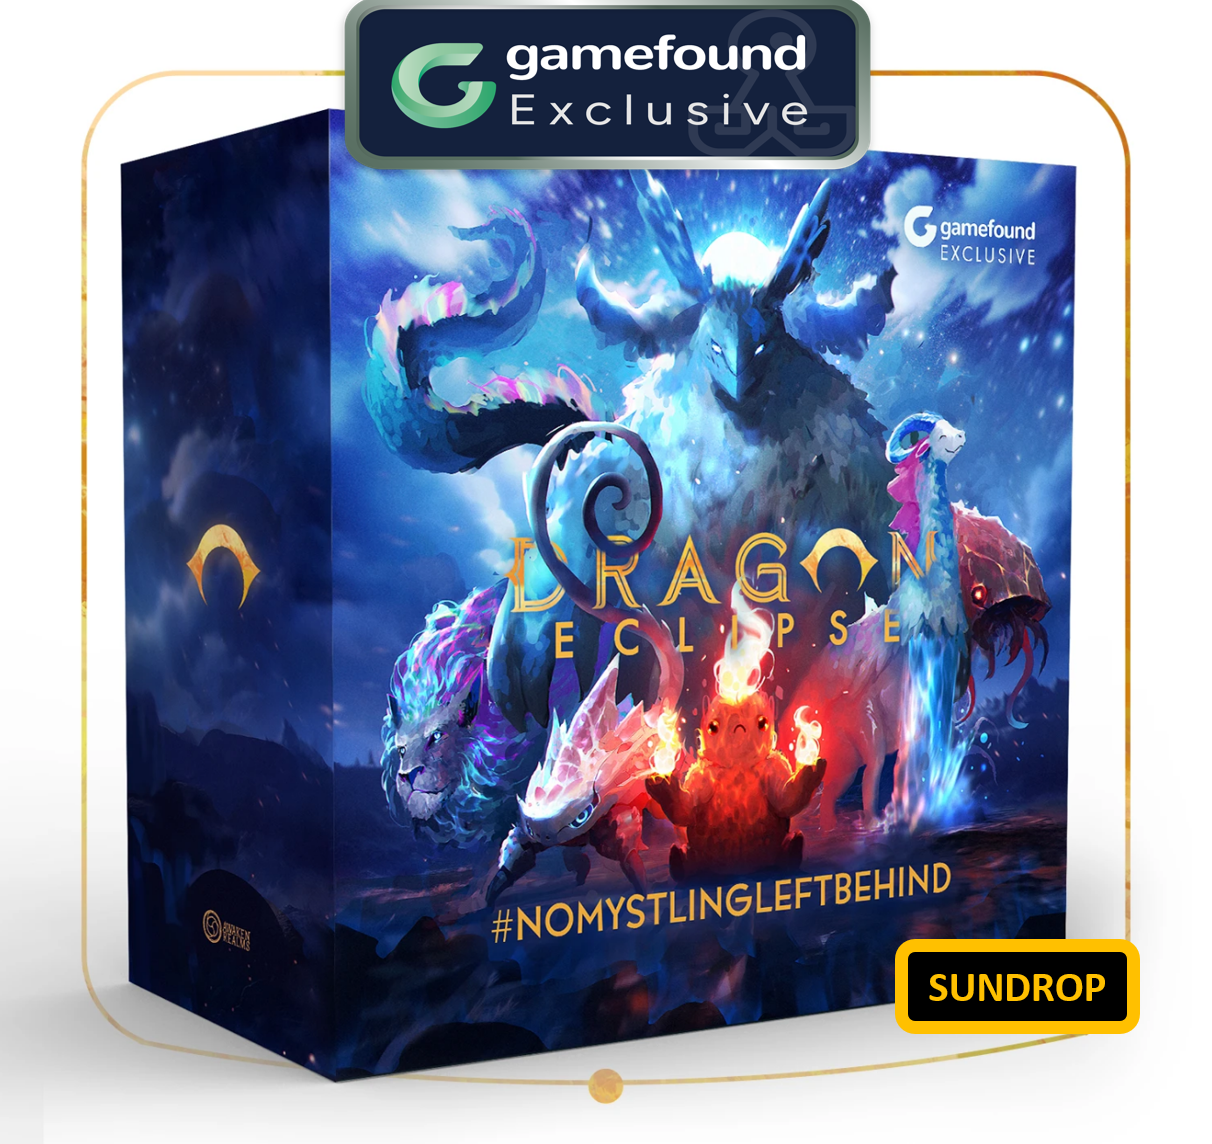 Gamefound Exclusive Dragon Eclipse Board Game 6 Mystlings Set Expansion, Sundrop Edition